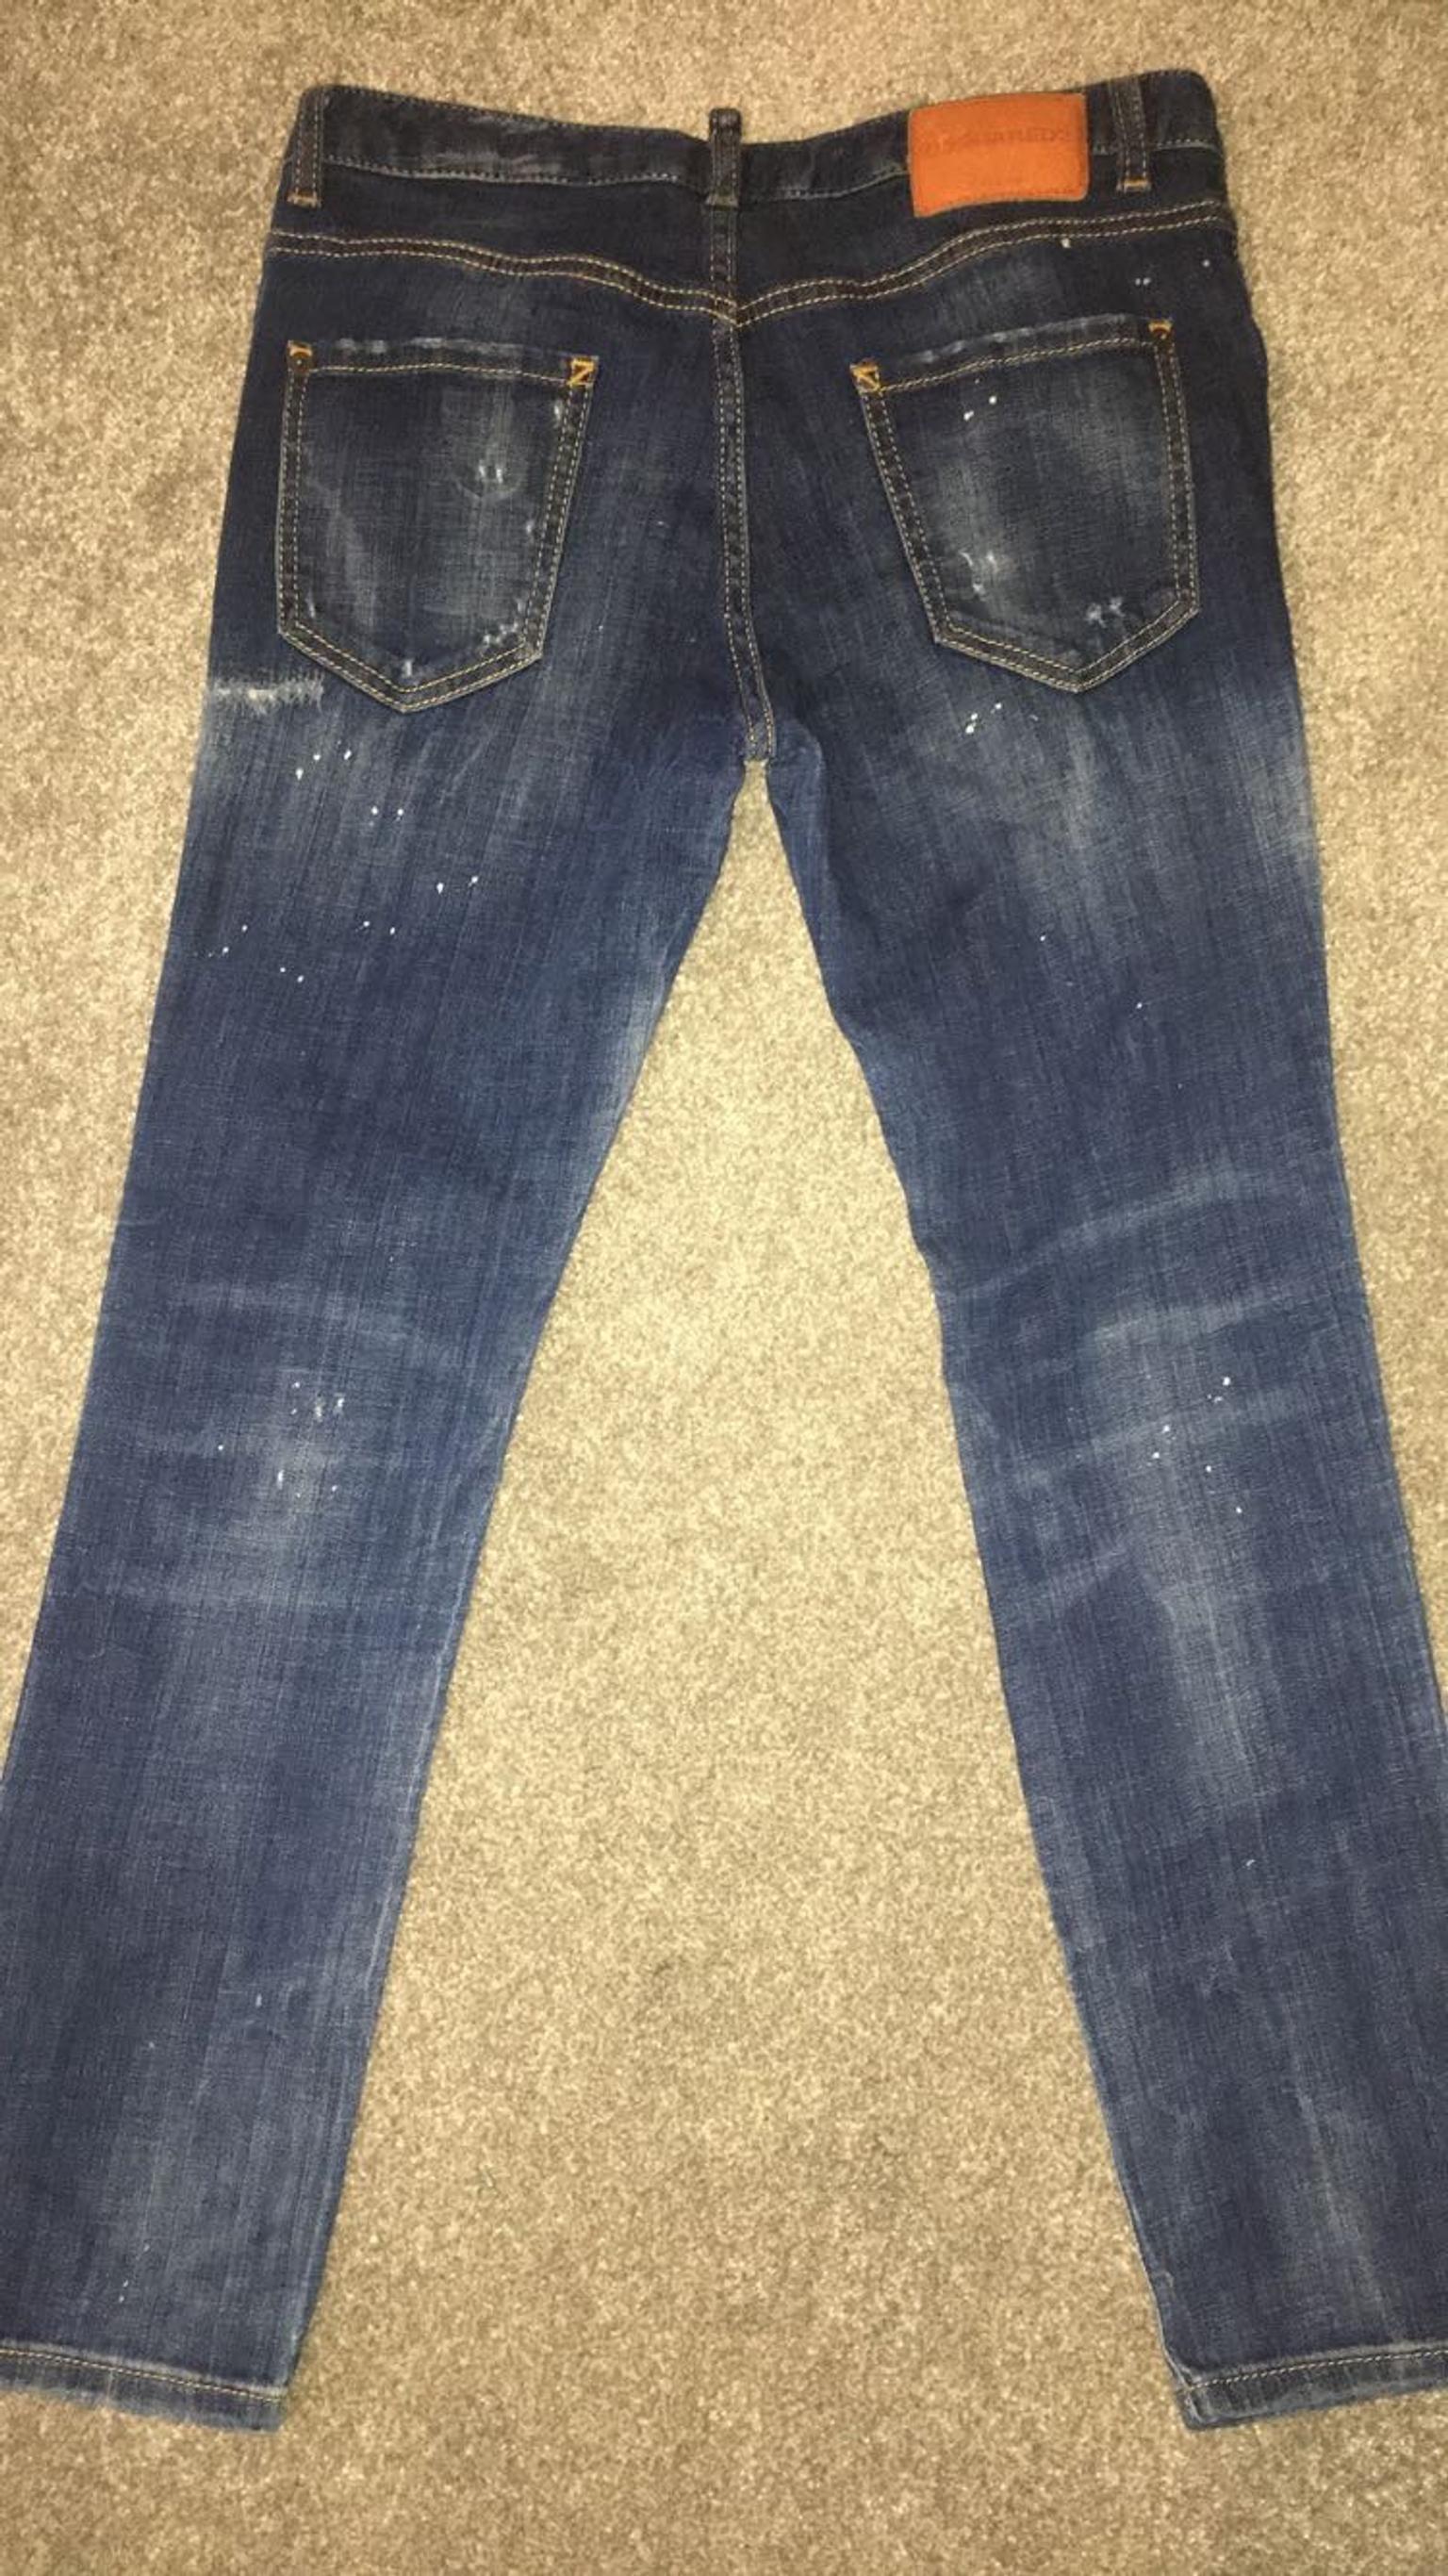 dsquared jeans on sale